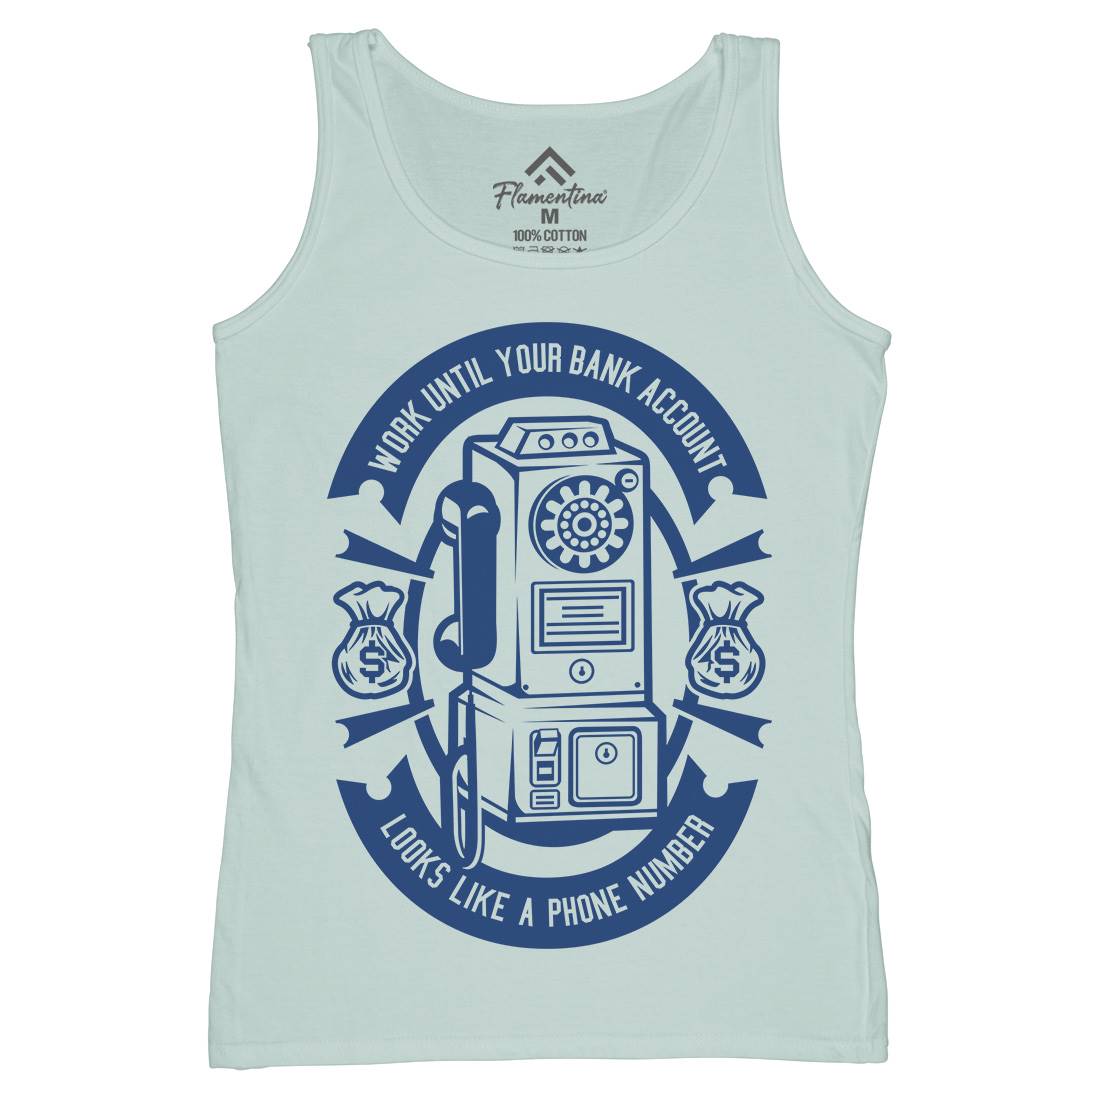 Phone Number Womens Organic Tank Top Vest Quotes A258